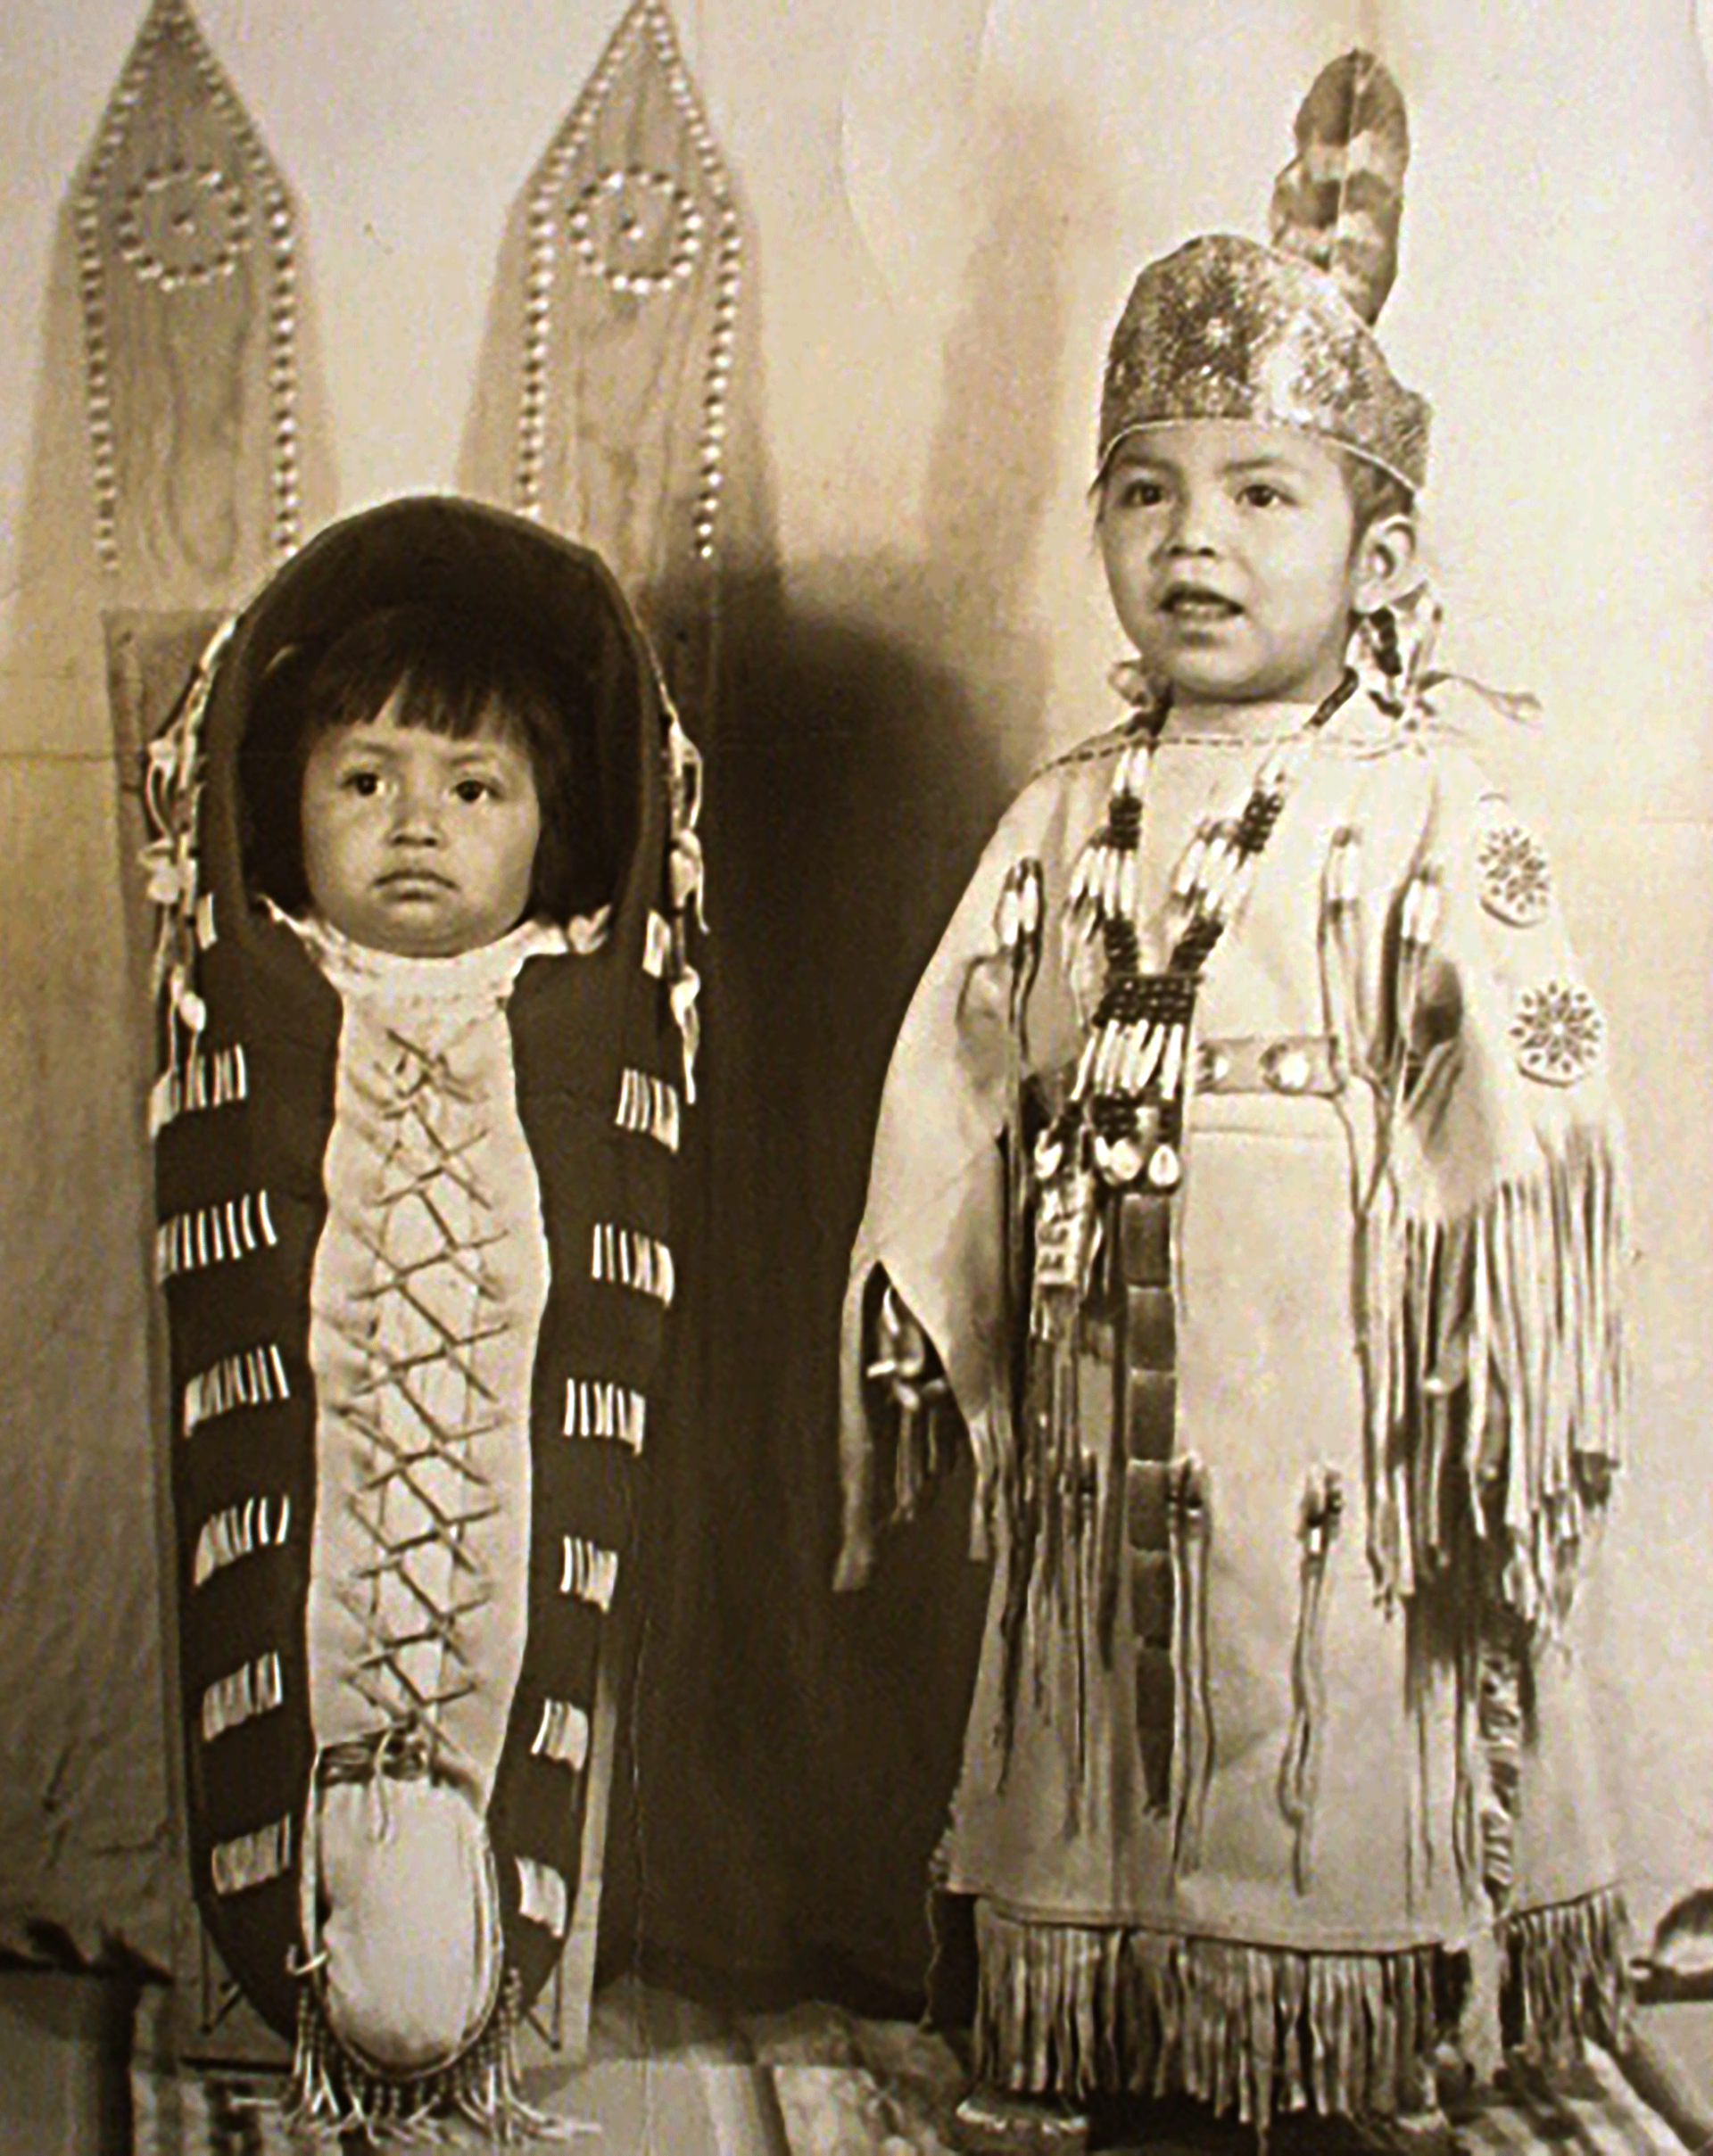 Black and white photo of two Indigenous children. A baby is laced into a carrier at left, and a toddler in a beaded buckskin dress stands at right.